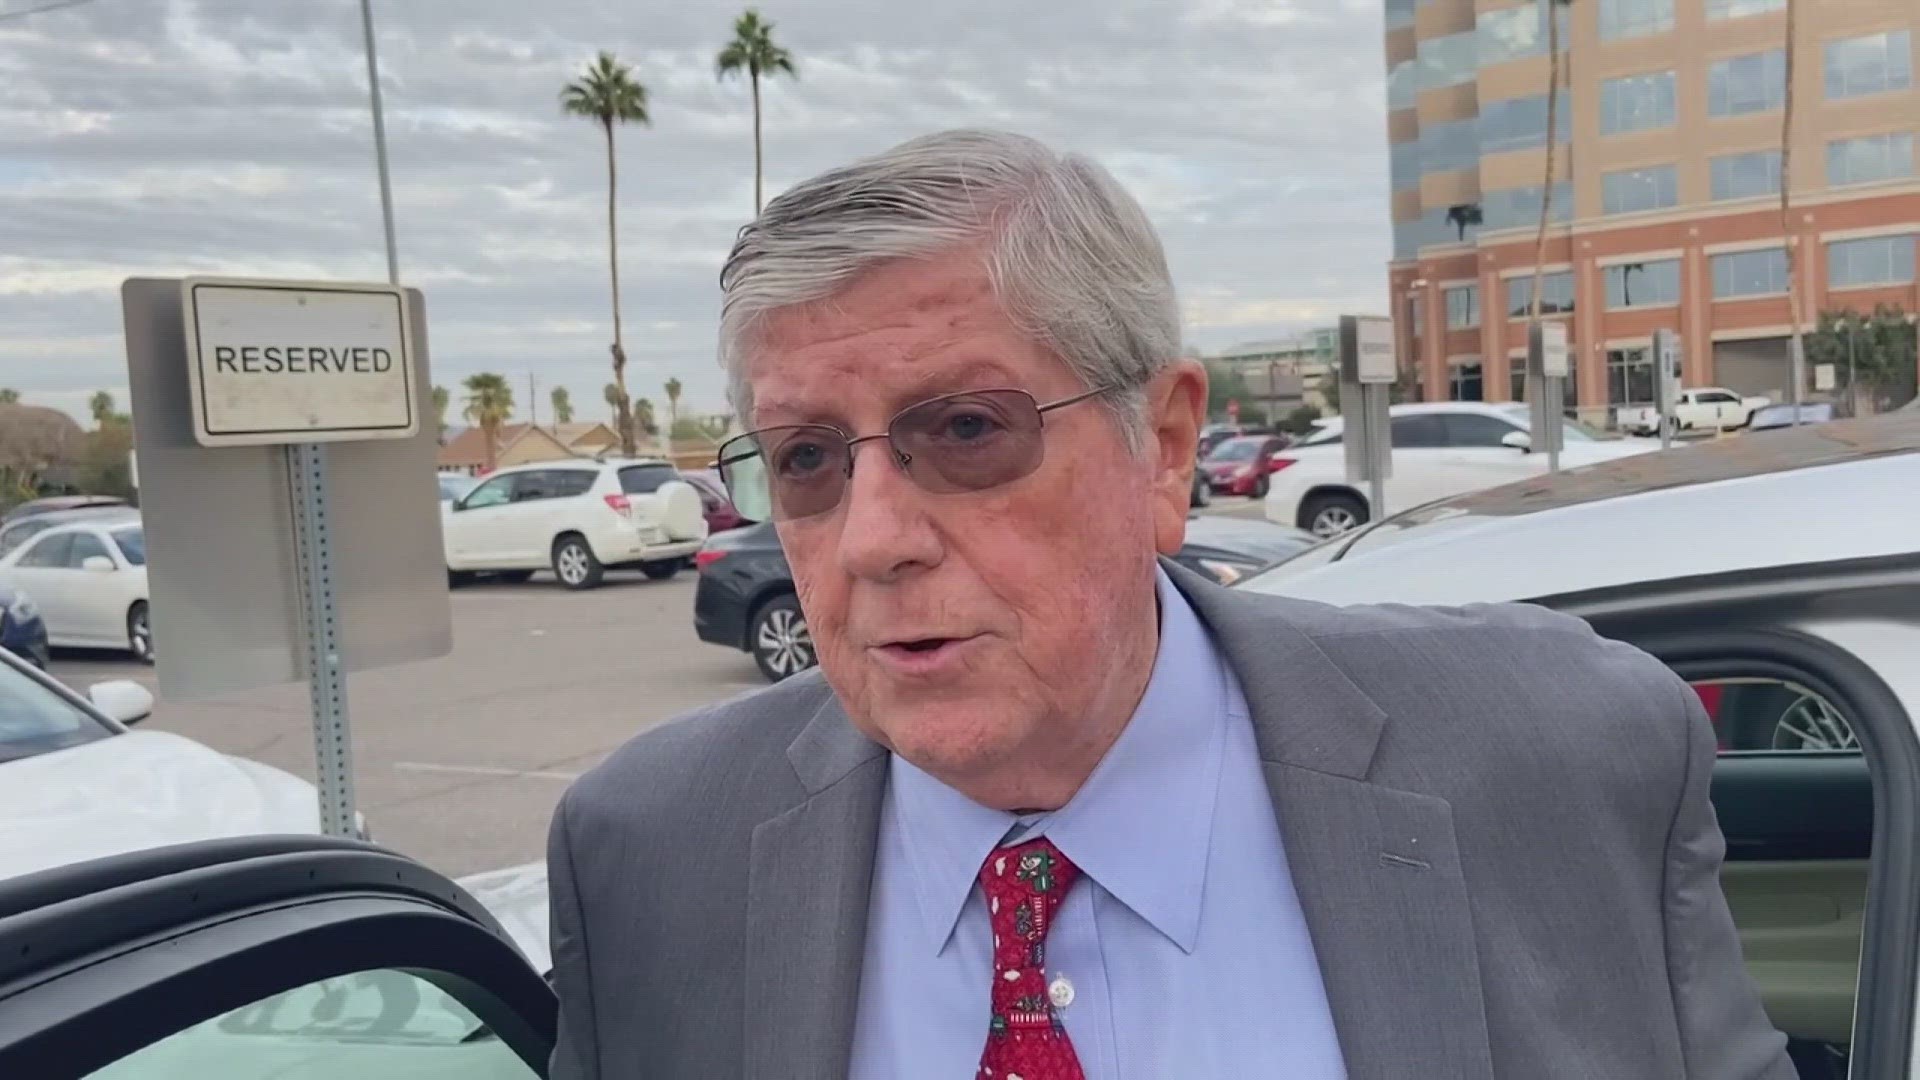 Arizona Corporation Commission chairman Jim O'Connor now wants to lead the Arizona Republican Party.